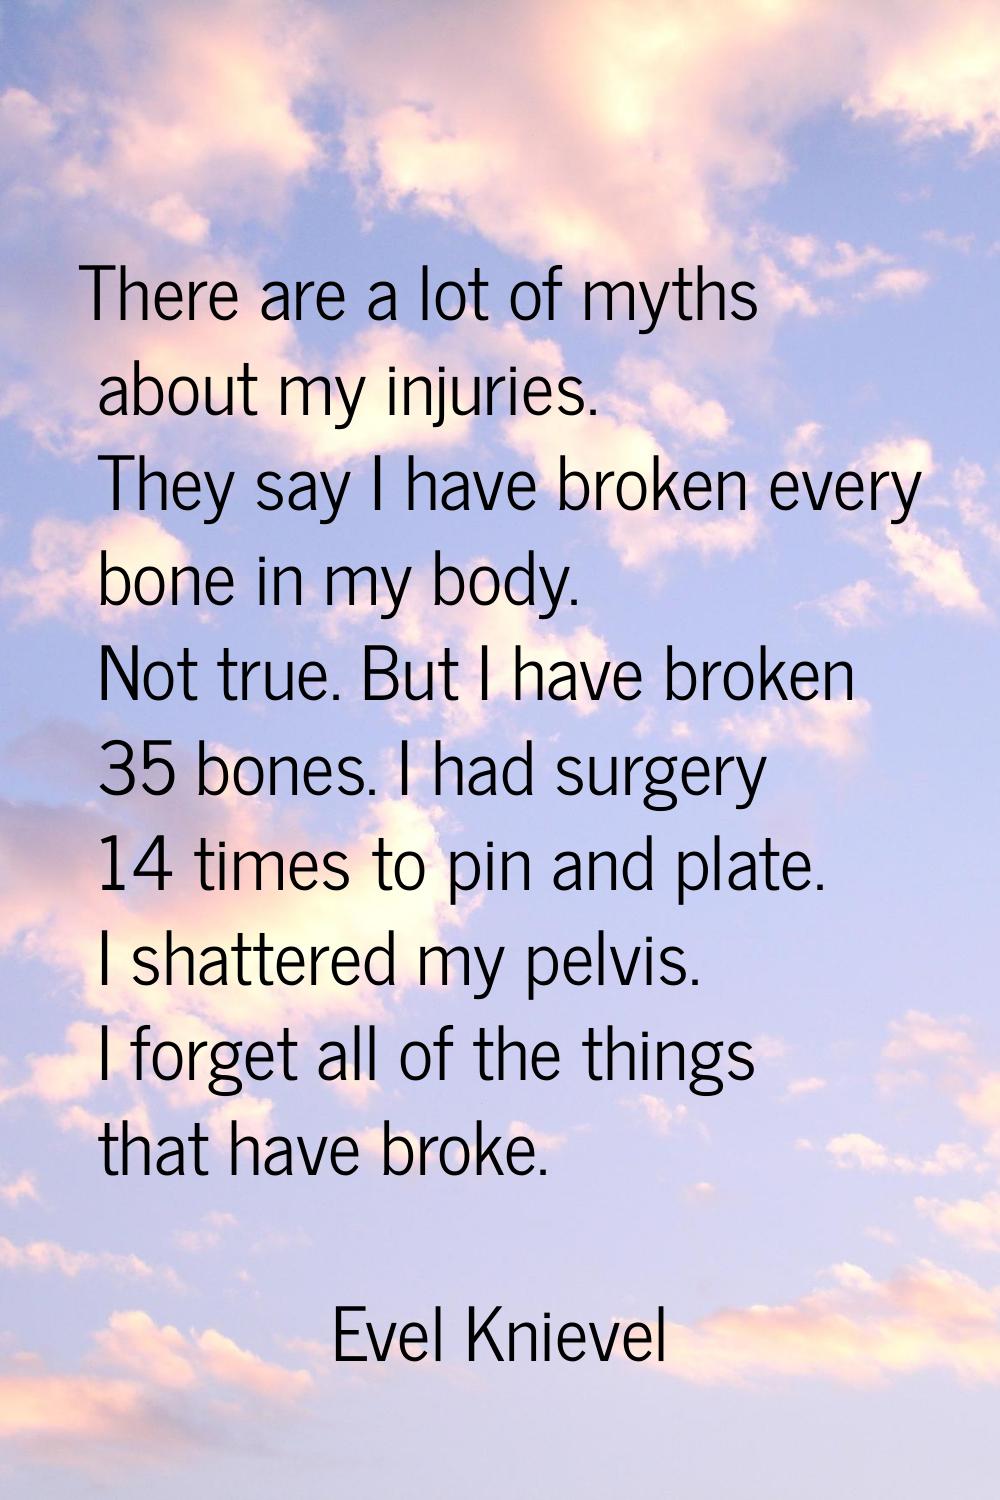 There are a lot of myths about my injuries. They say I have broken every bone in my body. Not true.